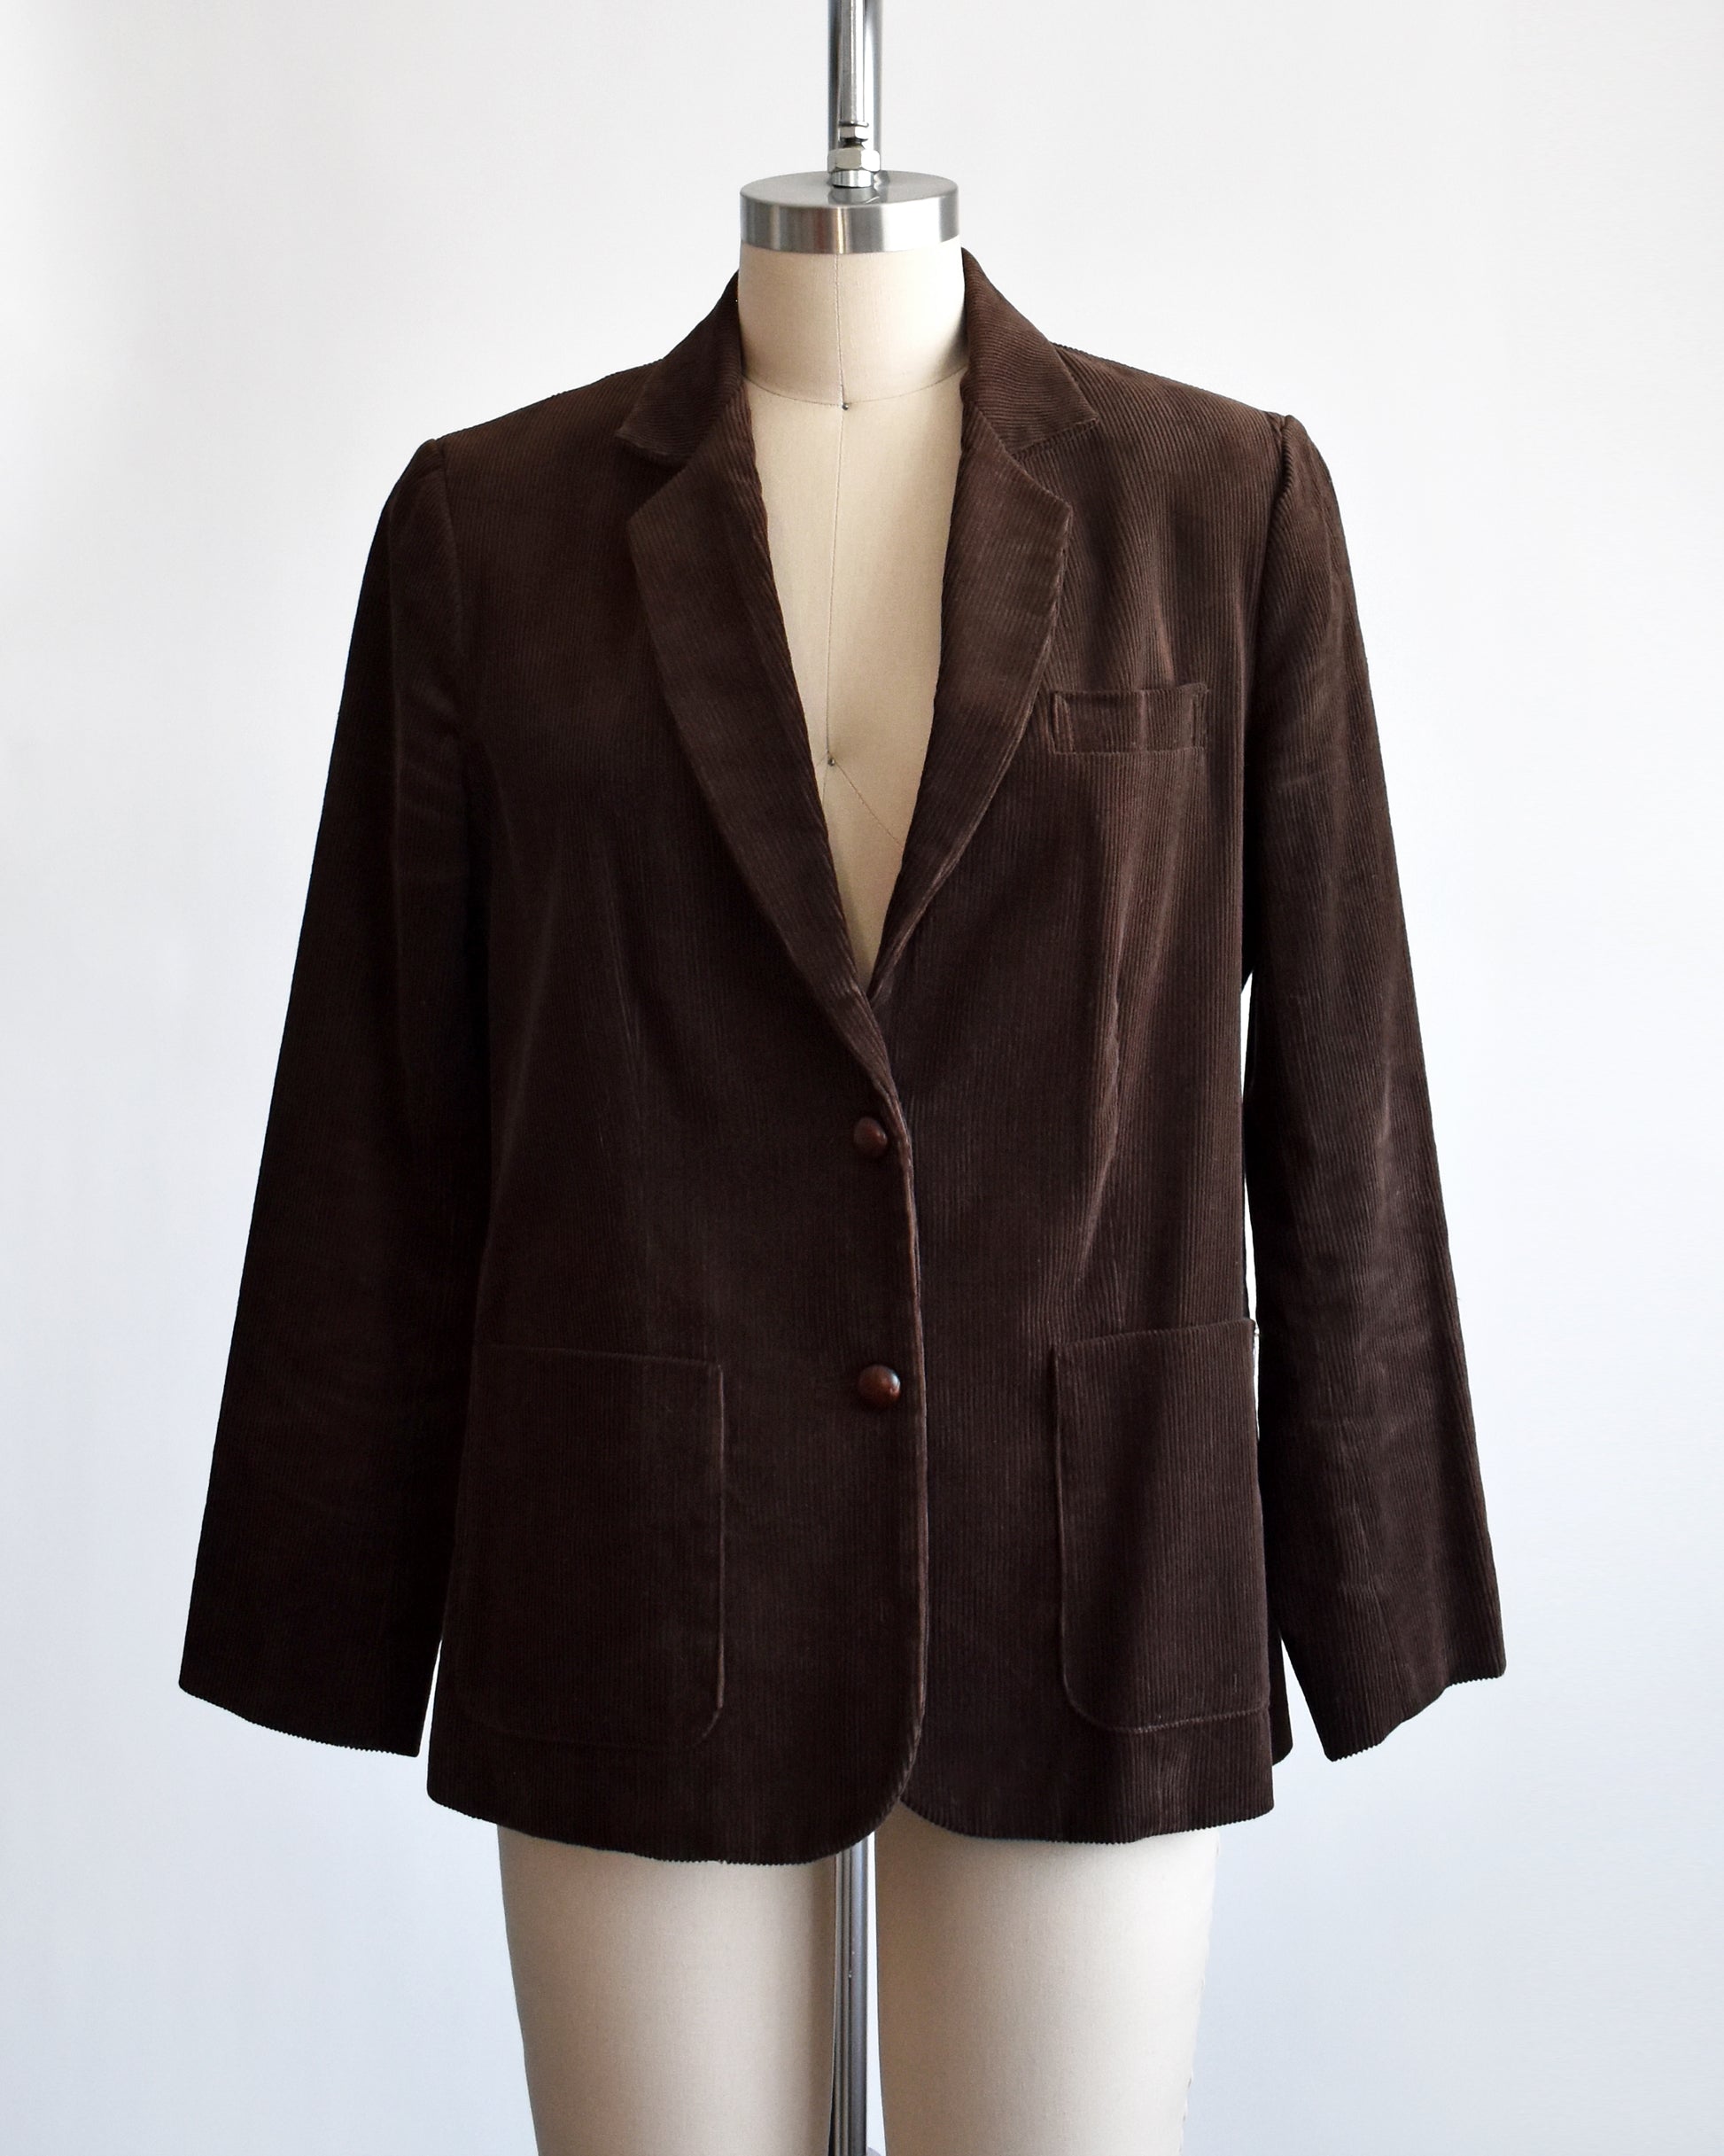 A vintage 1970s chocolate brown corduroy blazer features two faux wood plastic buttons on the front and two smaller matching buttons on the cuffs.